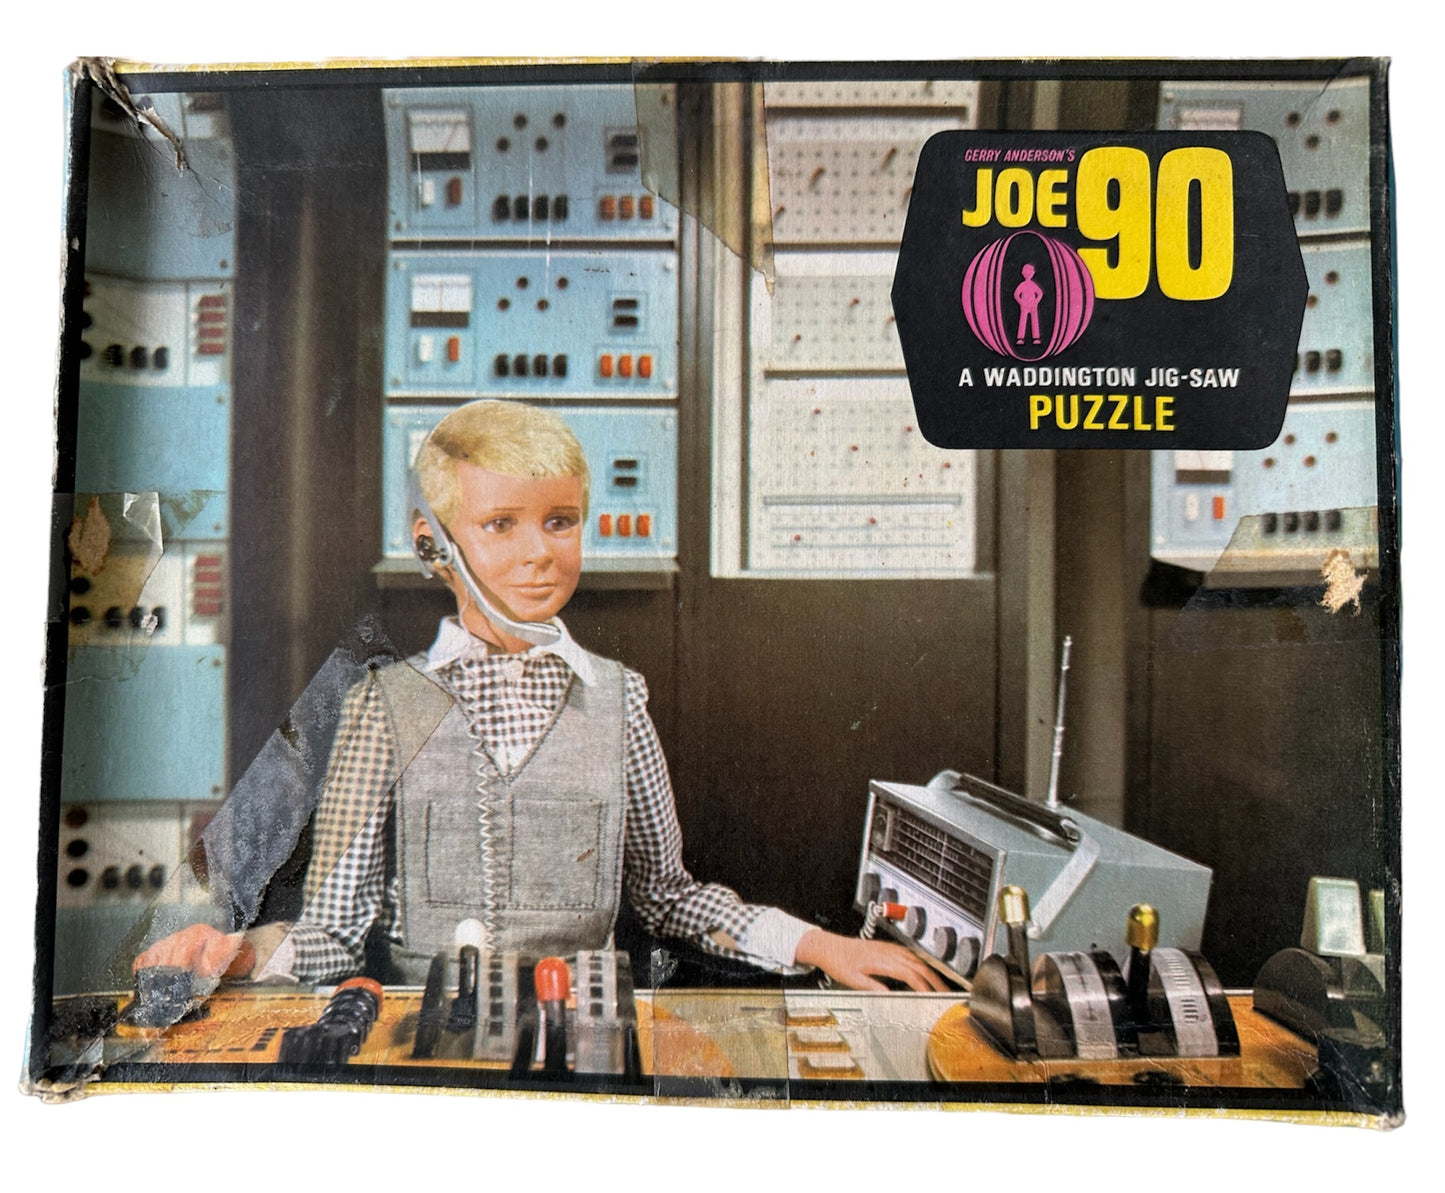 Waddington 1968 Gerry Andersons Joe 90 82 Piece Fully Interlocking Jigsaw Puzzle Joe 90 In The Lab - Fantastic Condition 100% Complete - In The Original Box